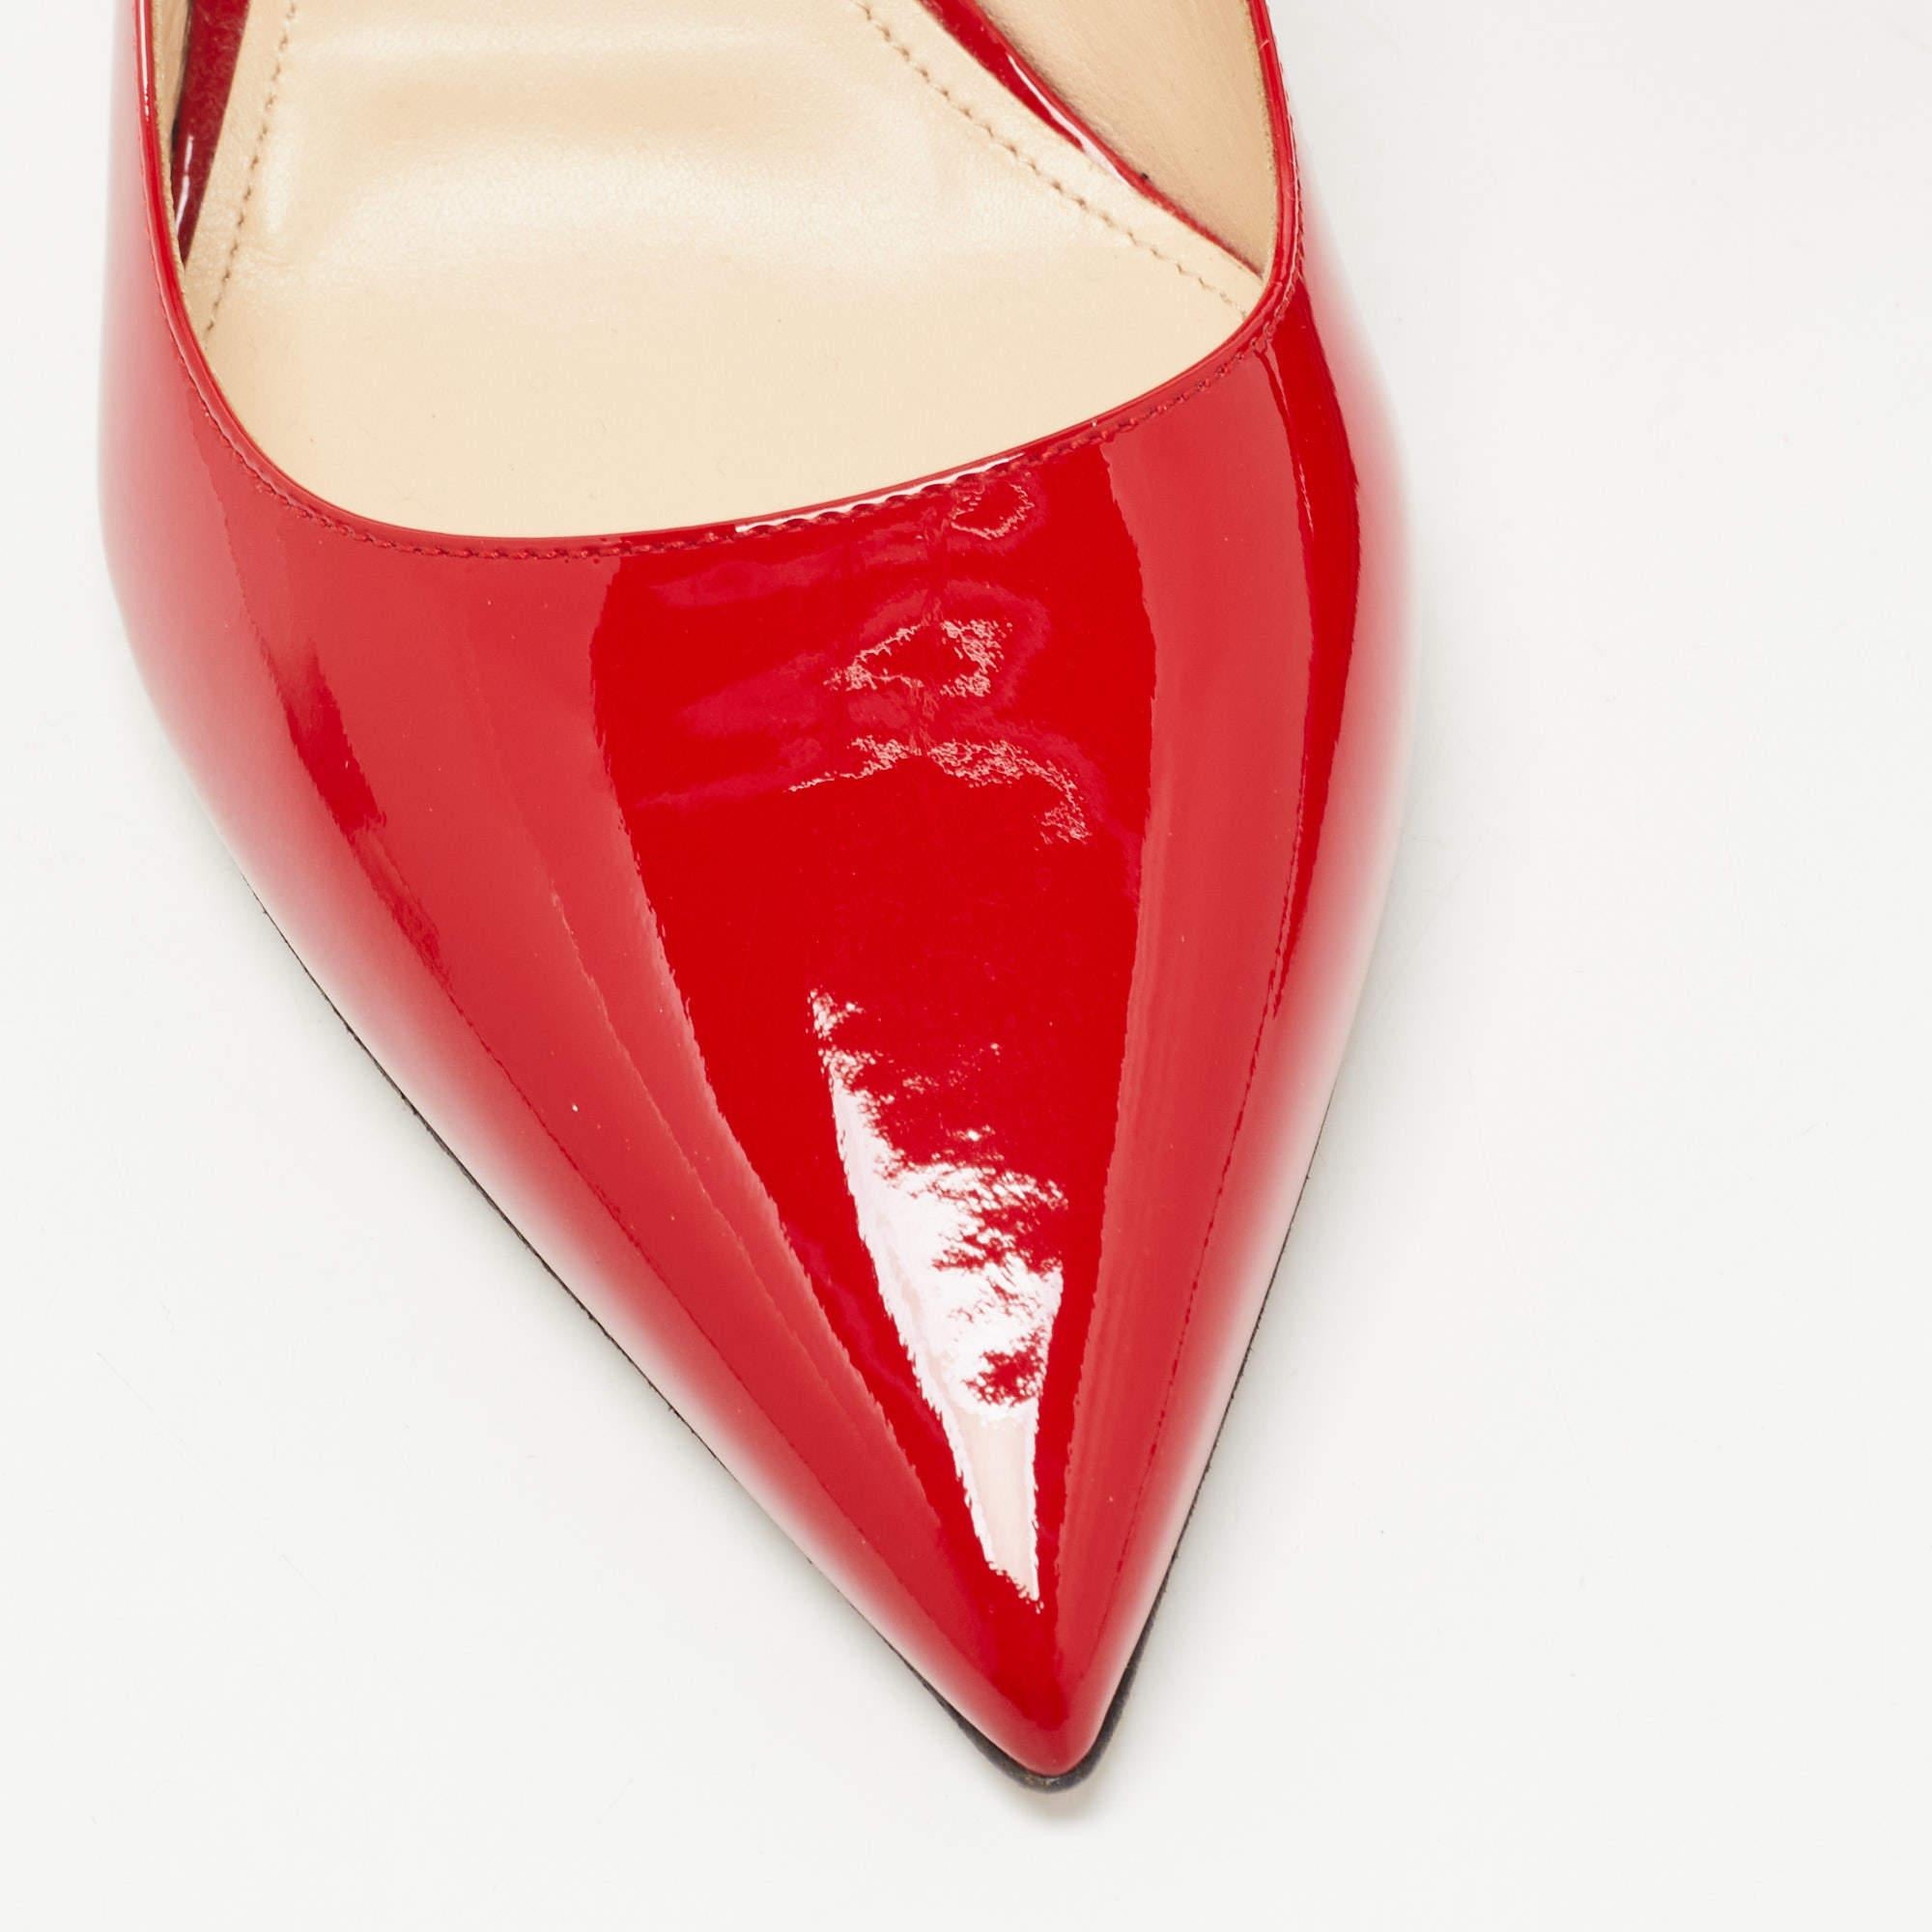 Prada Red Patent Leather Pointed Toe Pumps Size 40 2